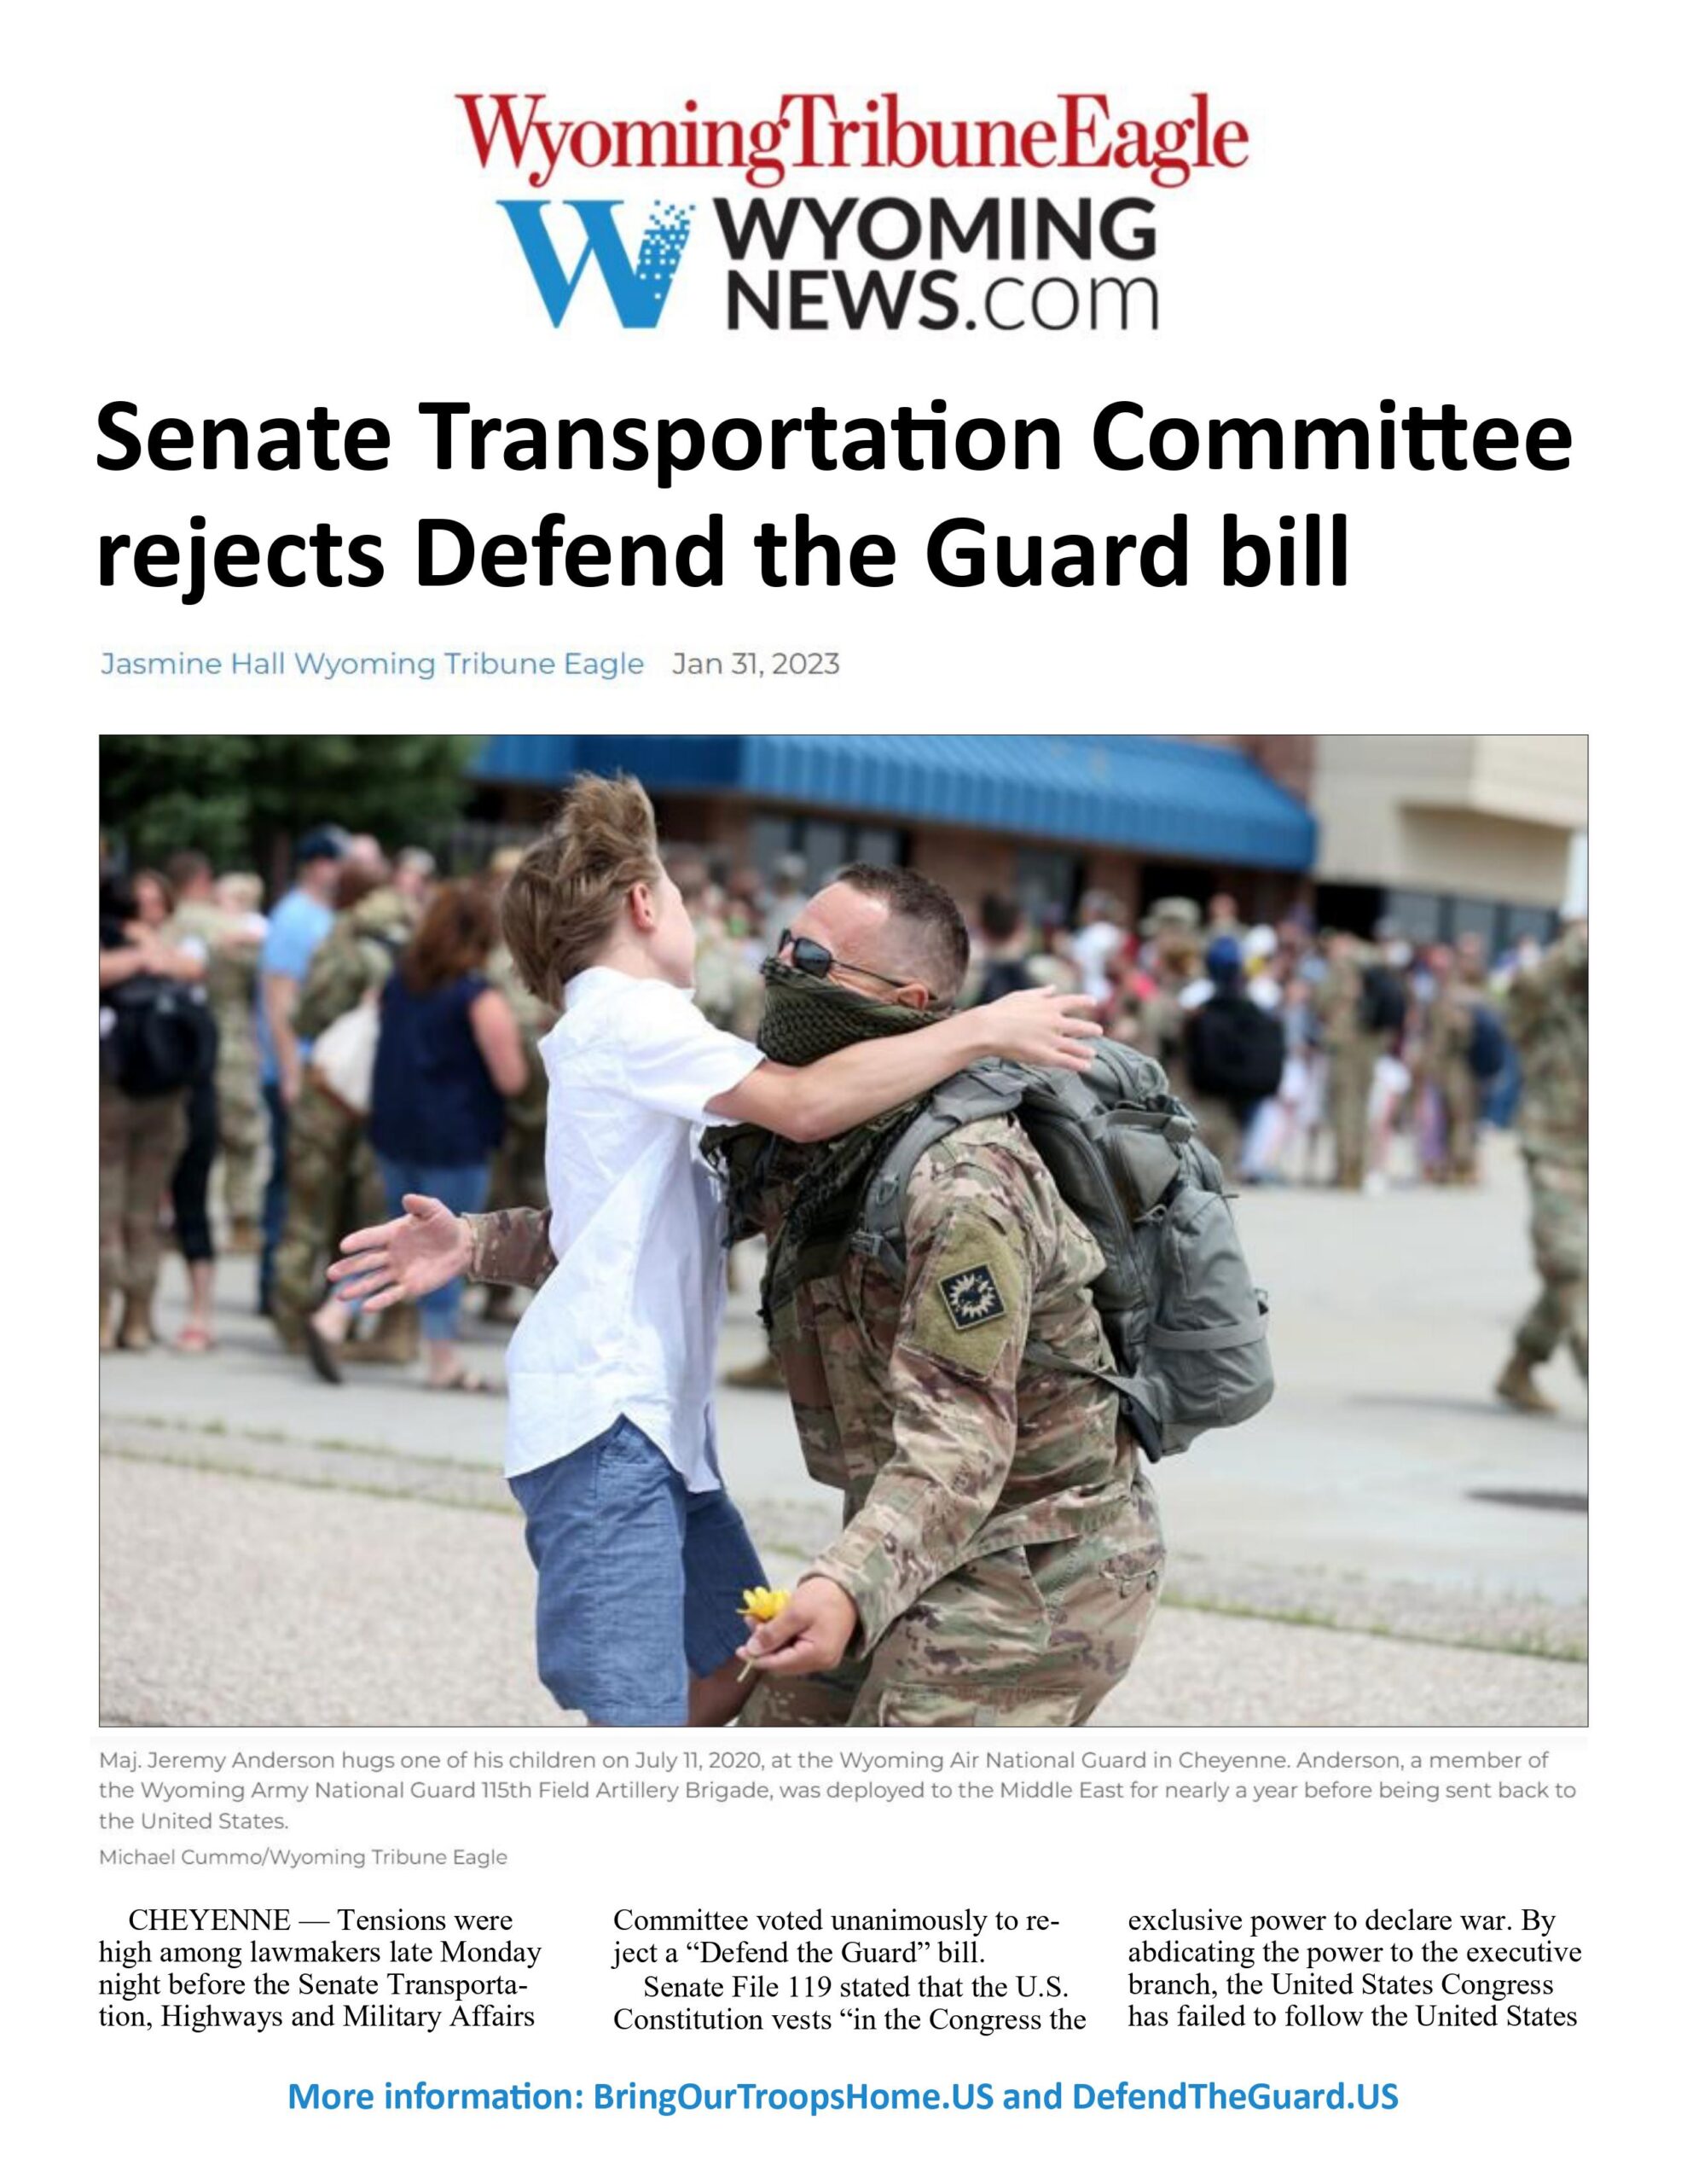 Senate Transportation Committee Rejects Defend the Guard Bill